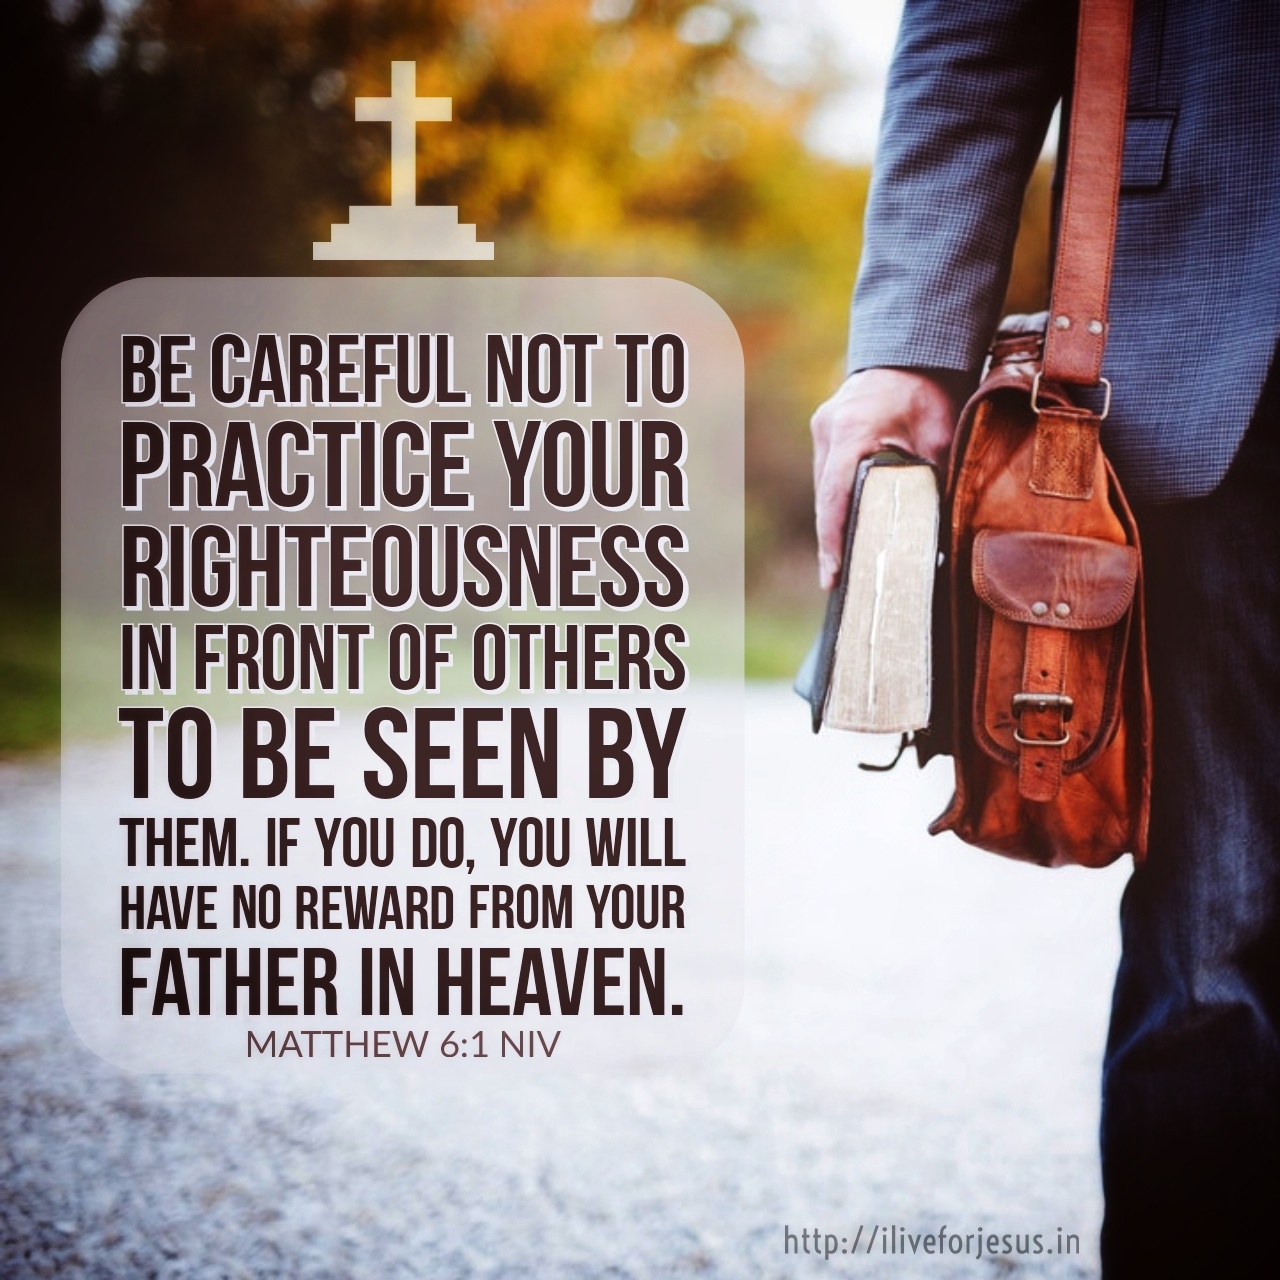 Be careful not to practice your righteousness in front of others to be seen by them. If you do, you will have no reward from your Father in heaven. Matthew 6:1 NIV